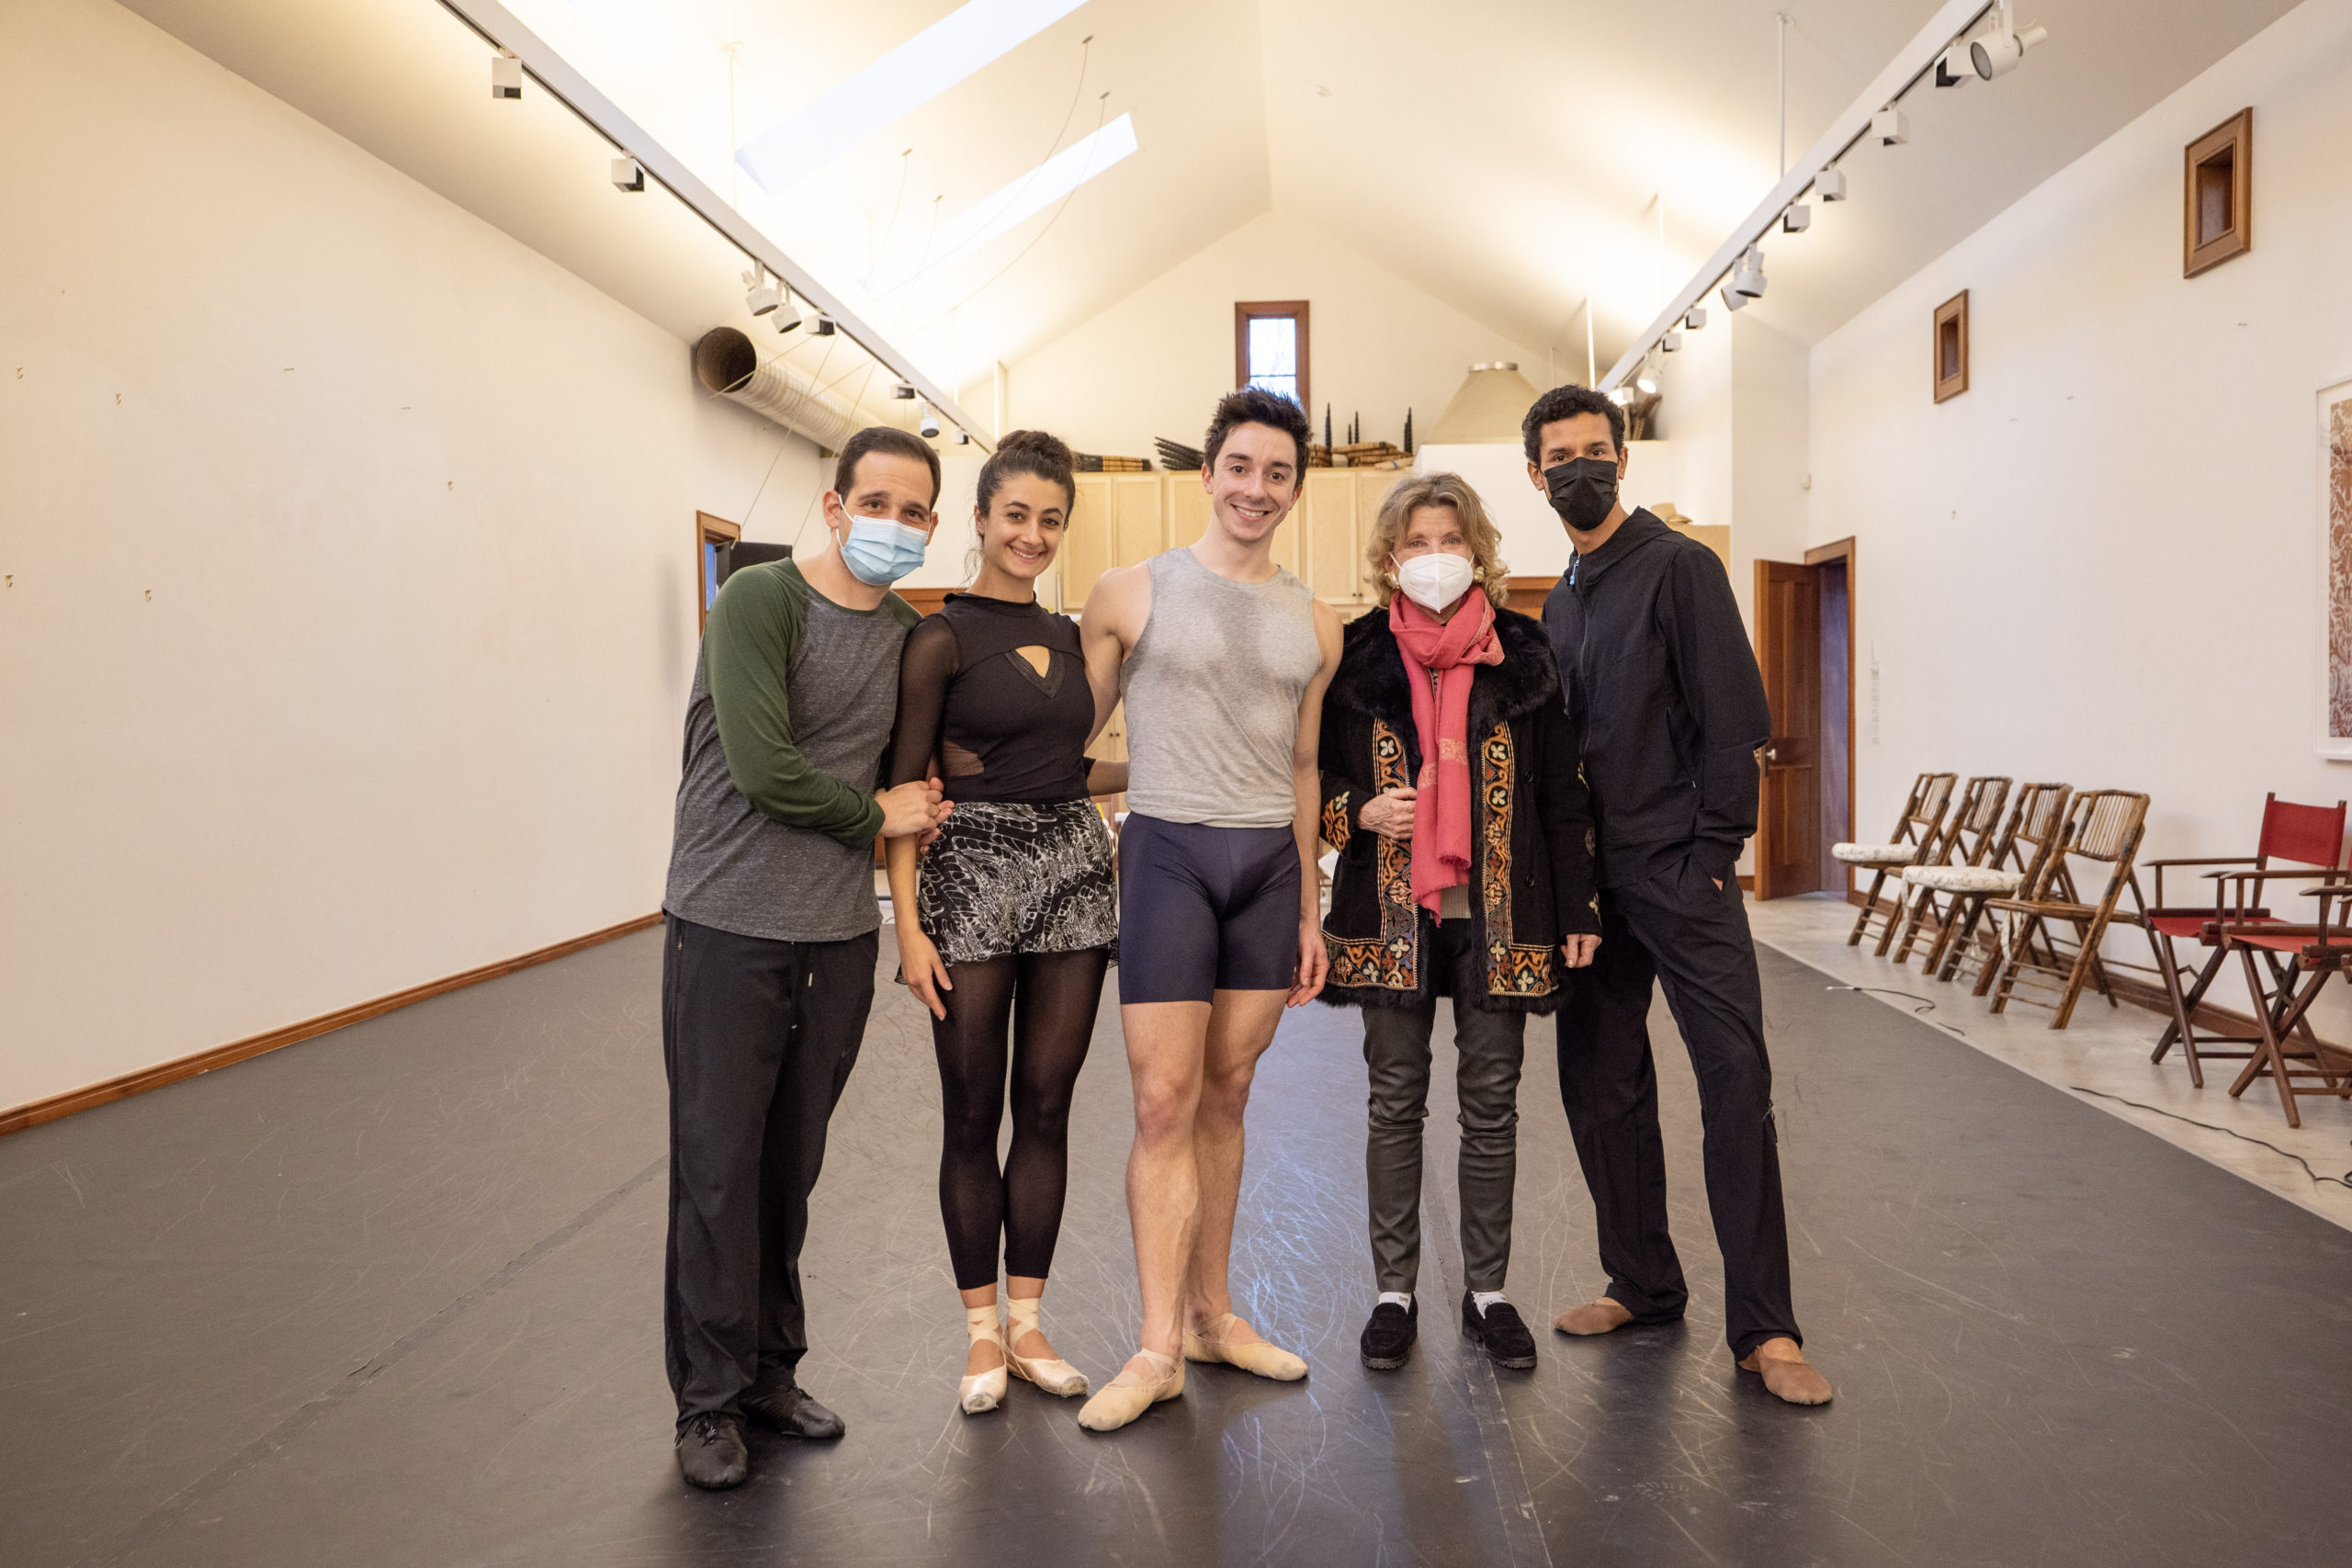 Hamptons Dance Project in rehearsal at the Guild Hall William P. Rayner Artist-in-Residence studio. From left, Craig Salstein, Lauren Bonfiglio, Tyler Maloney, Kathy Rayner and Jose Sebastian. © JOE BRONDO FOR GUILD HALL